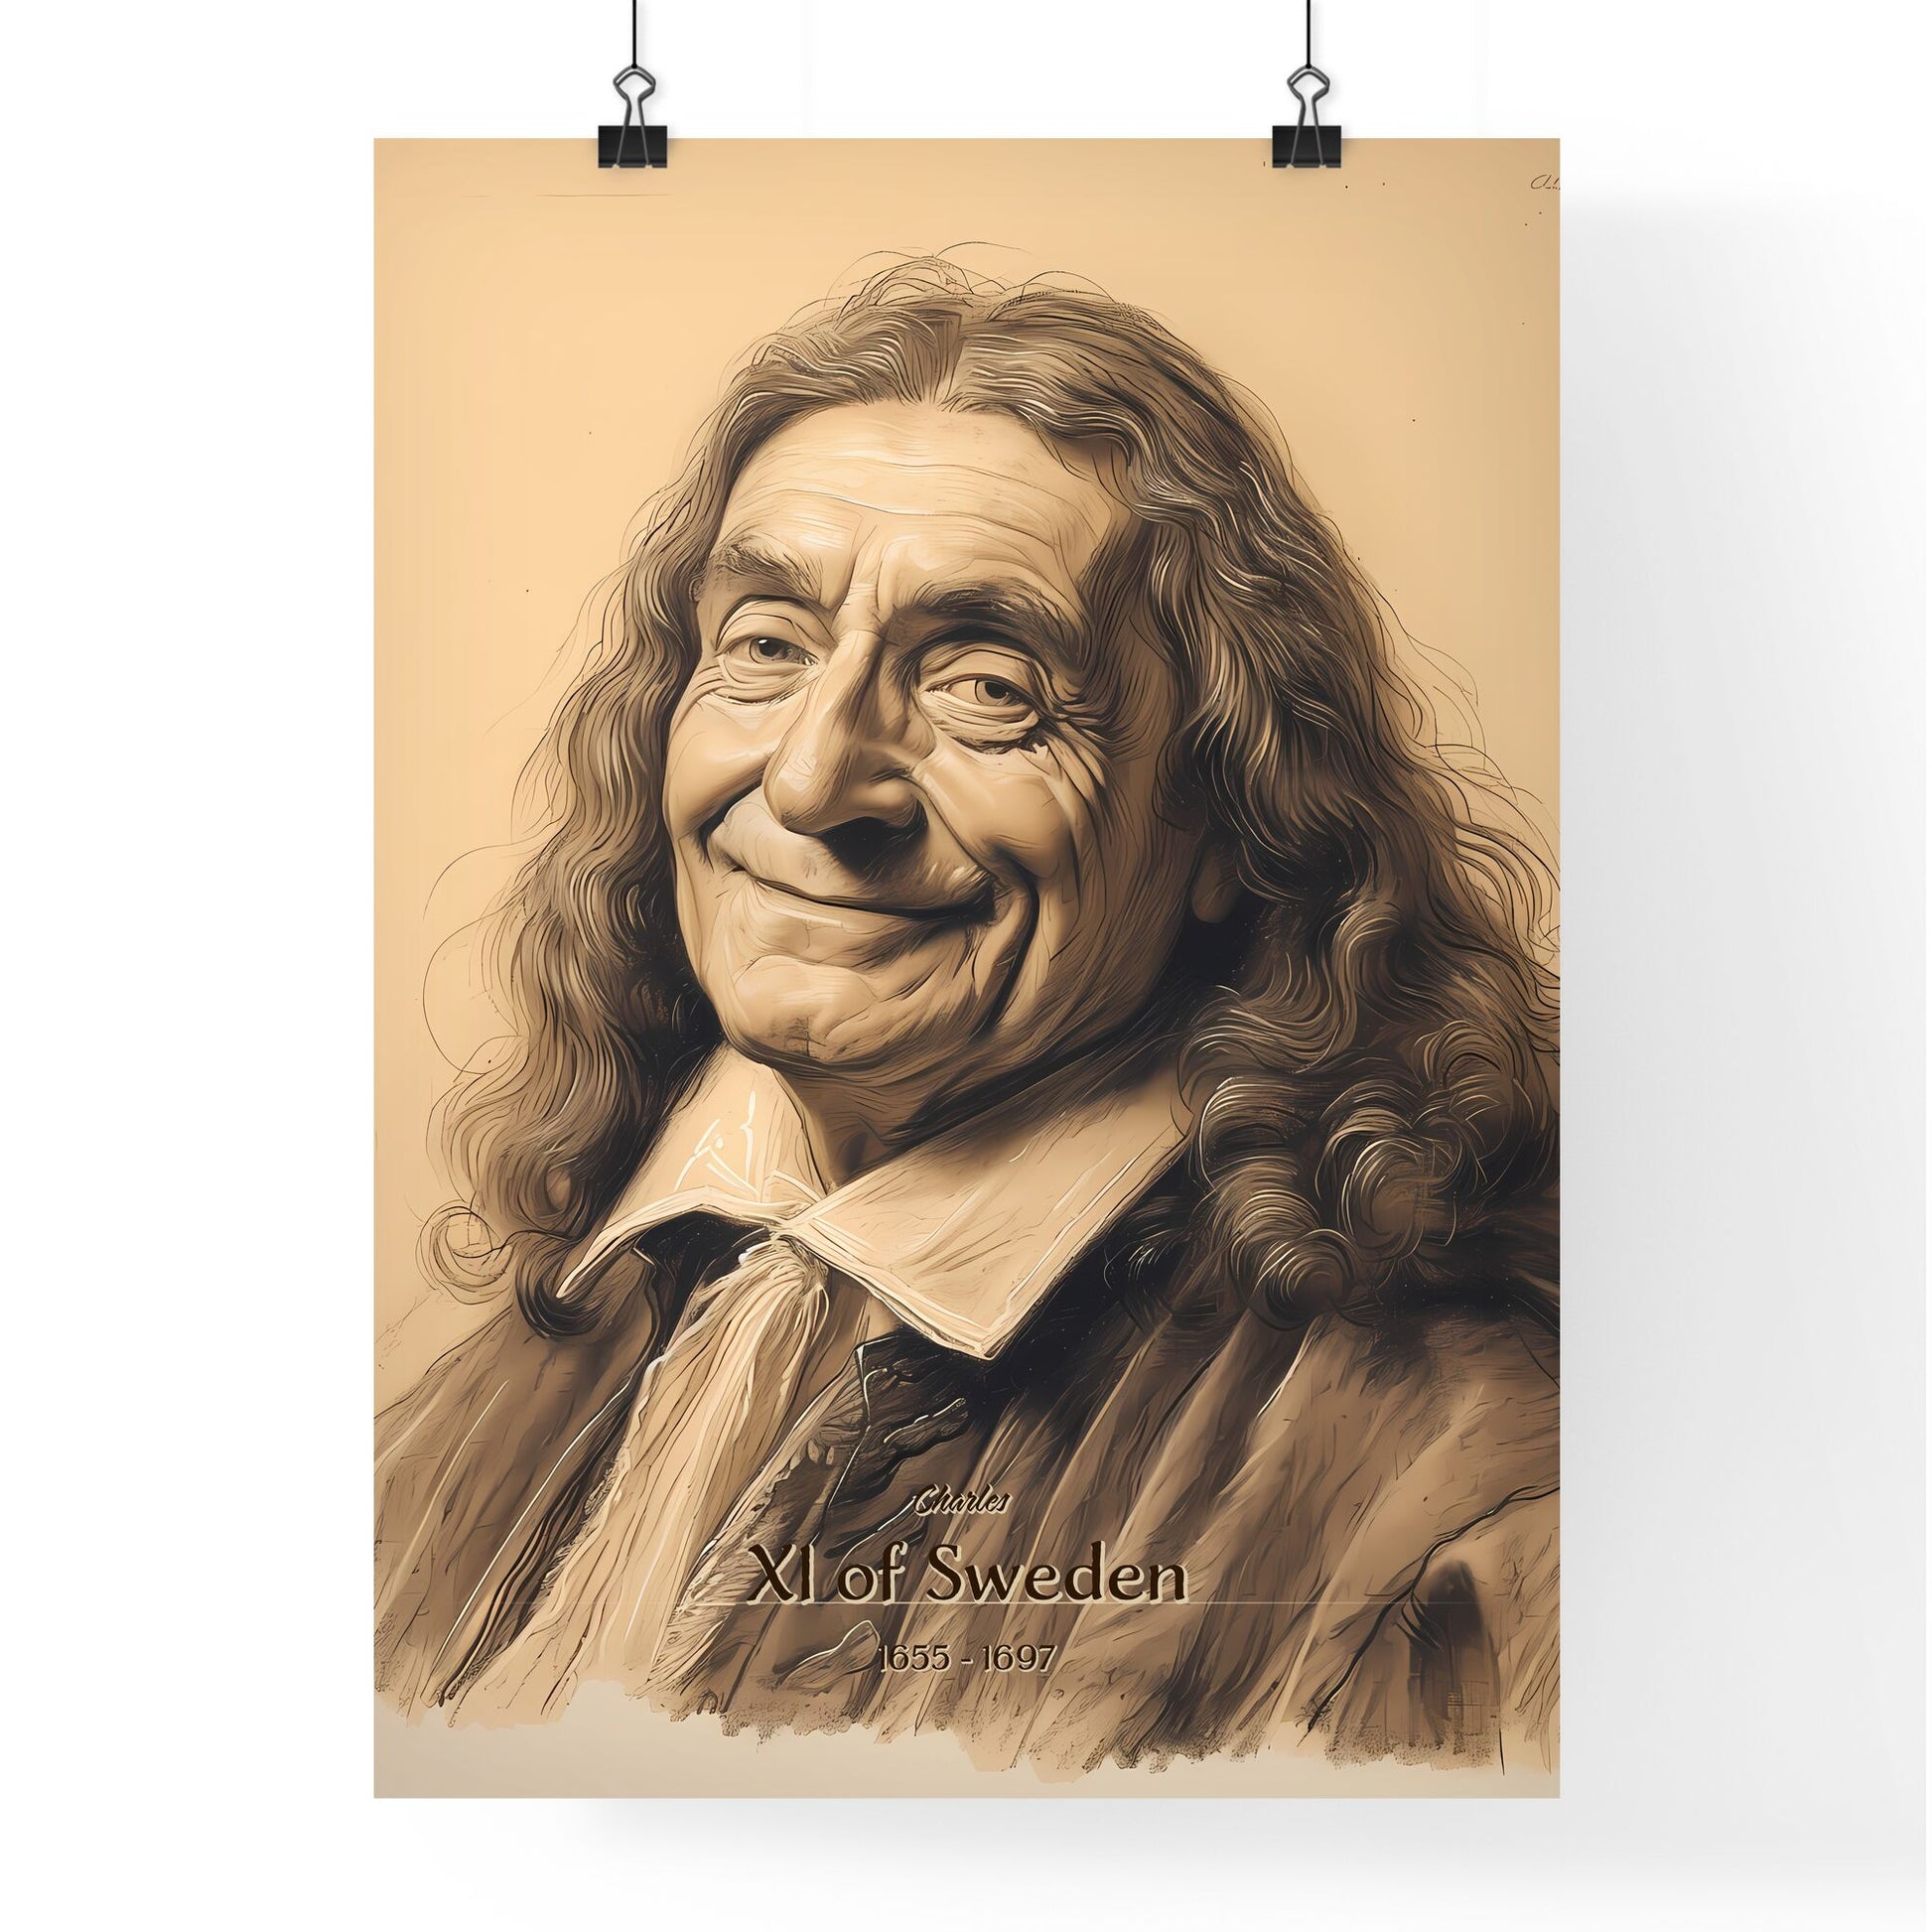 Charles, XI of Sweden, 1655 - 1697, A Poster of a man with long hair smiling Default Title